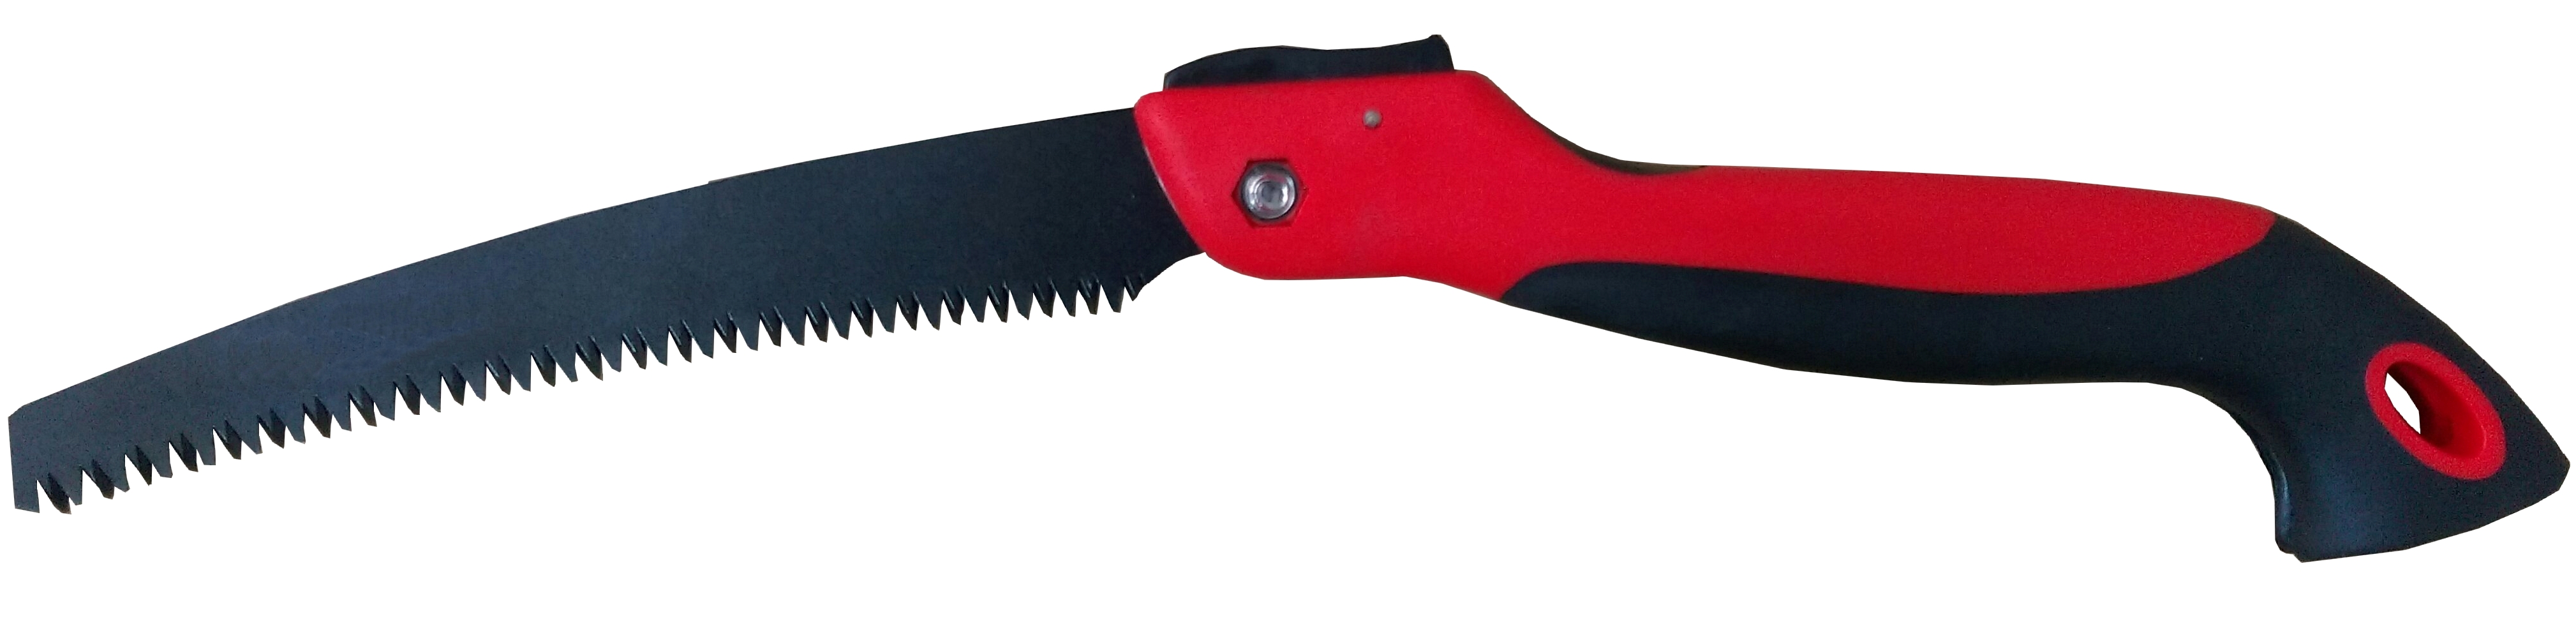 240mm Curved Folding Saw